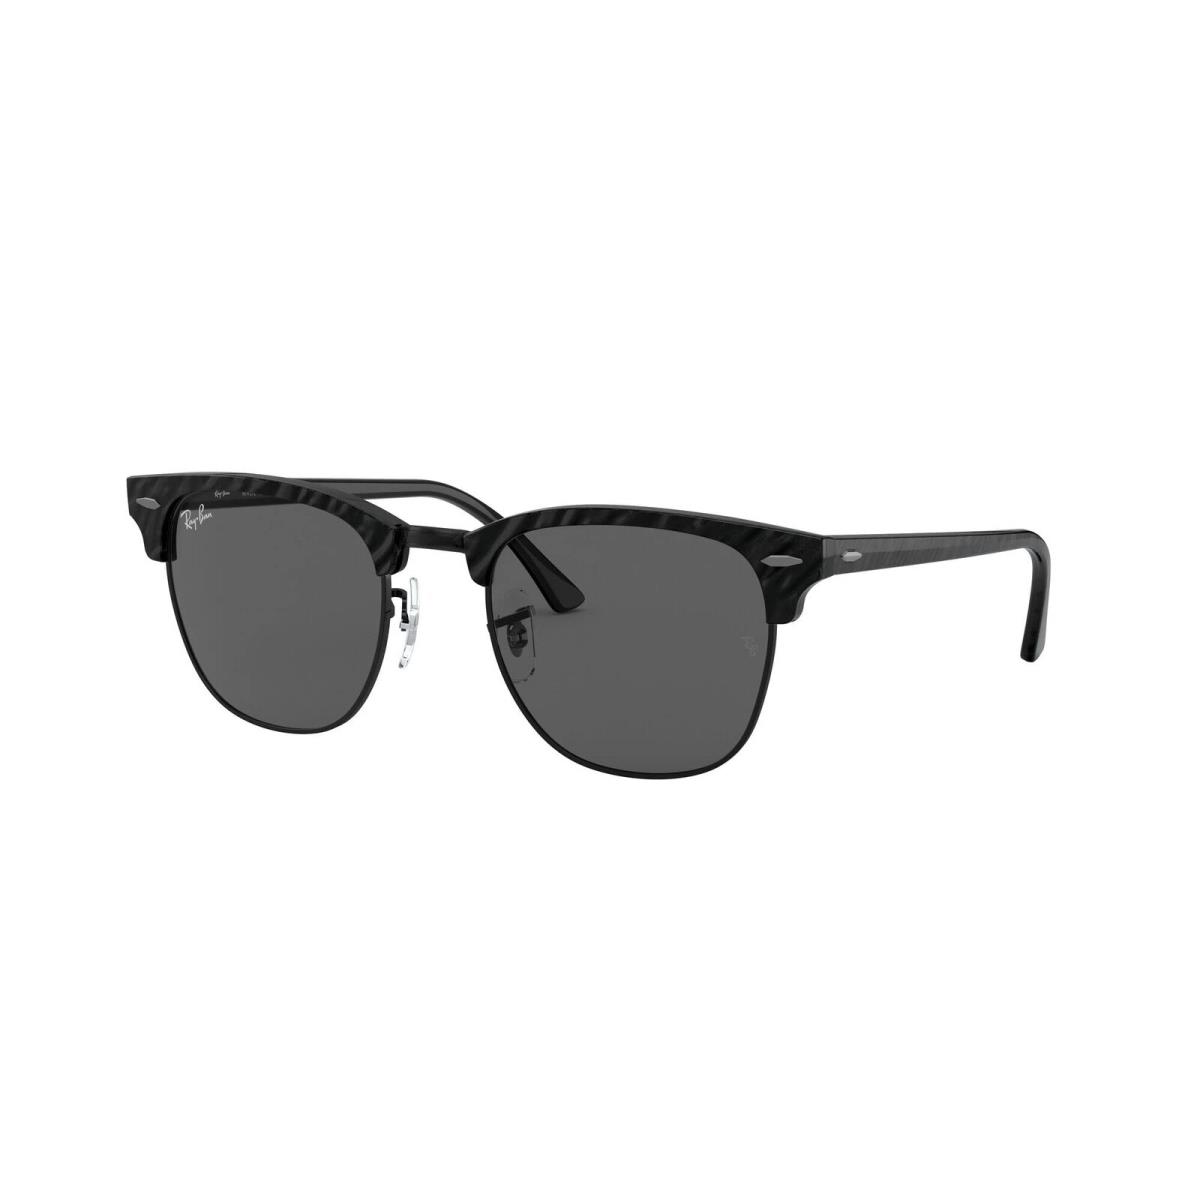 Ray-ban RB3016 Clubmaster Square Sunglasses Wrinkled Black Dark Grey 49 mm - Wrinkled Black on Black/Dark Grey